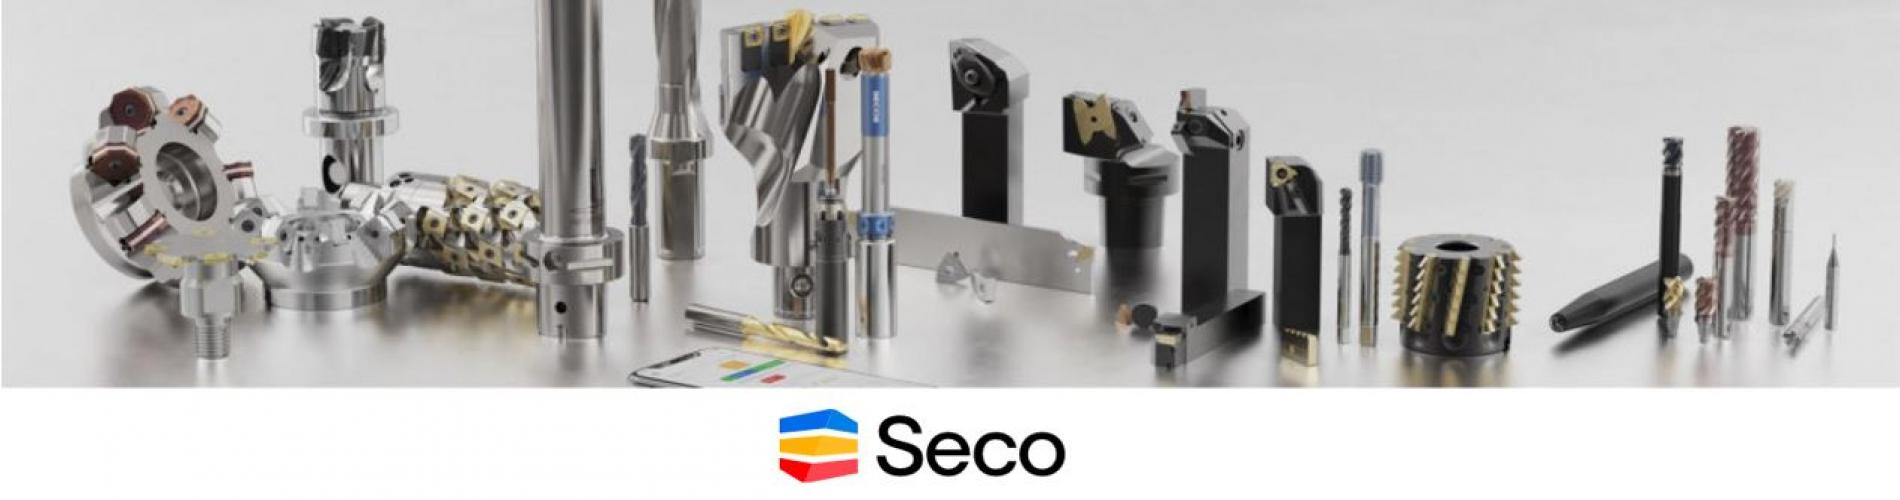 NEW Hompage Carousel Seco Tools Banner 